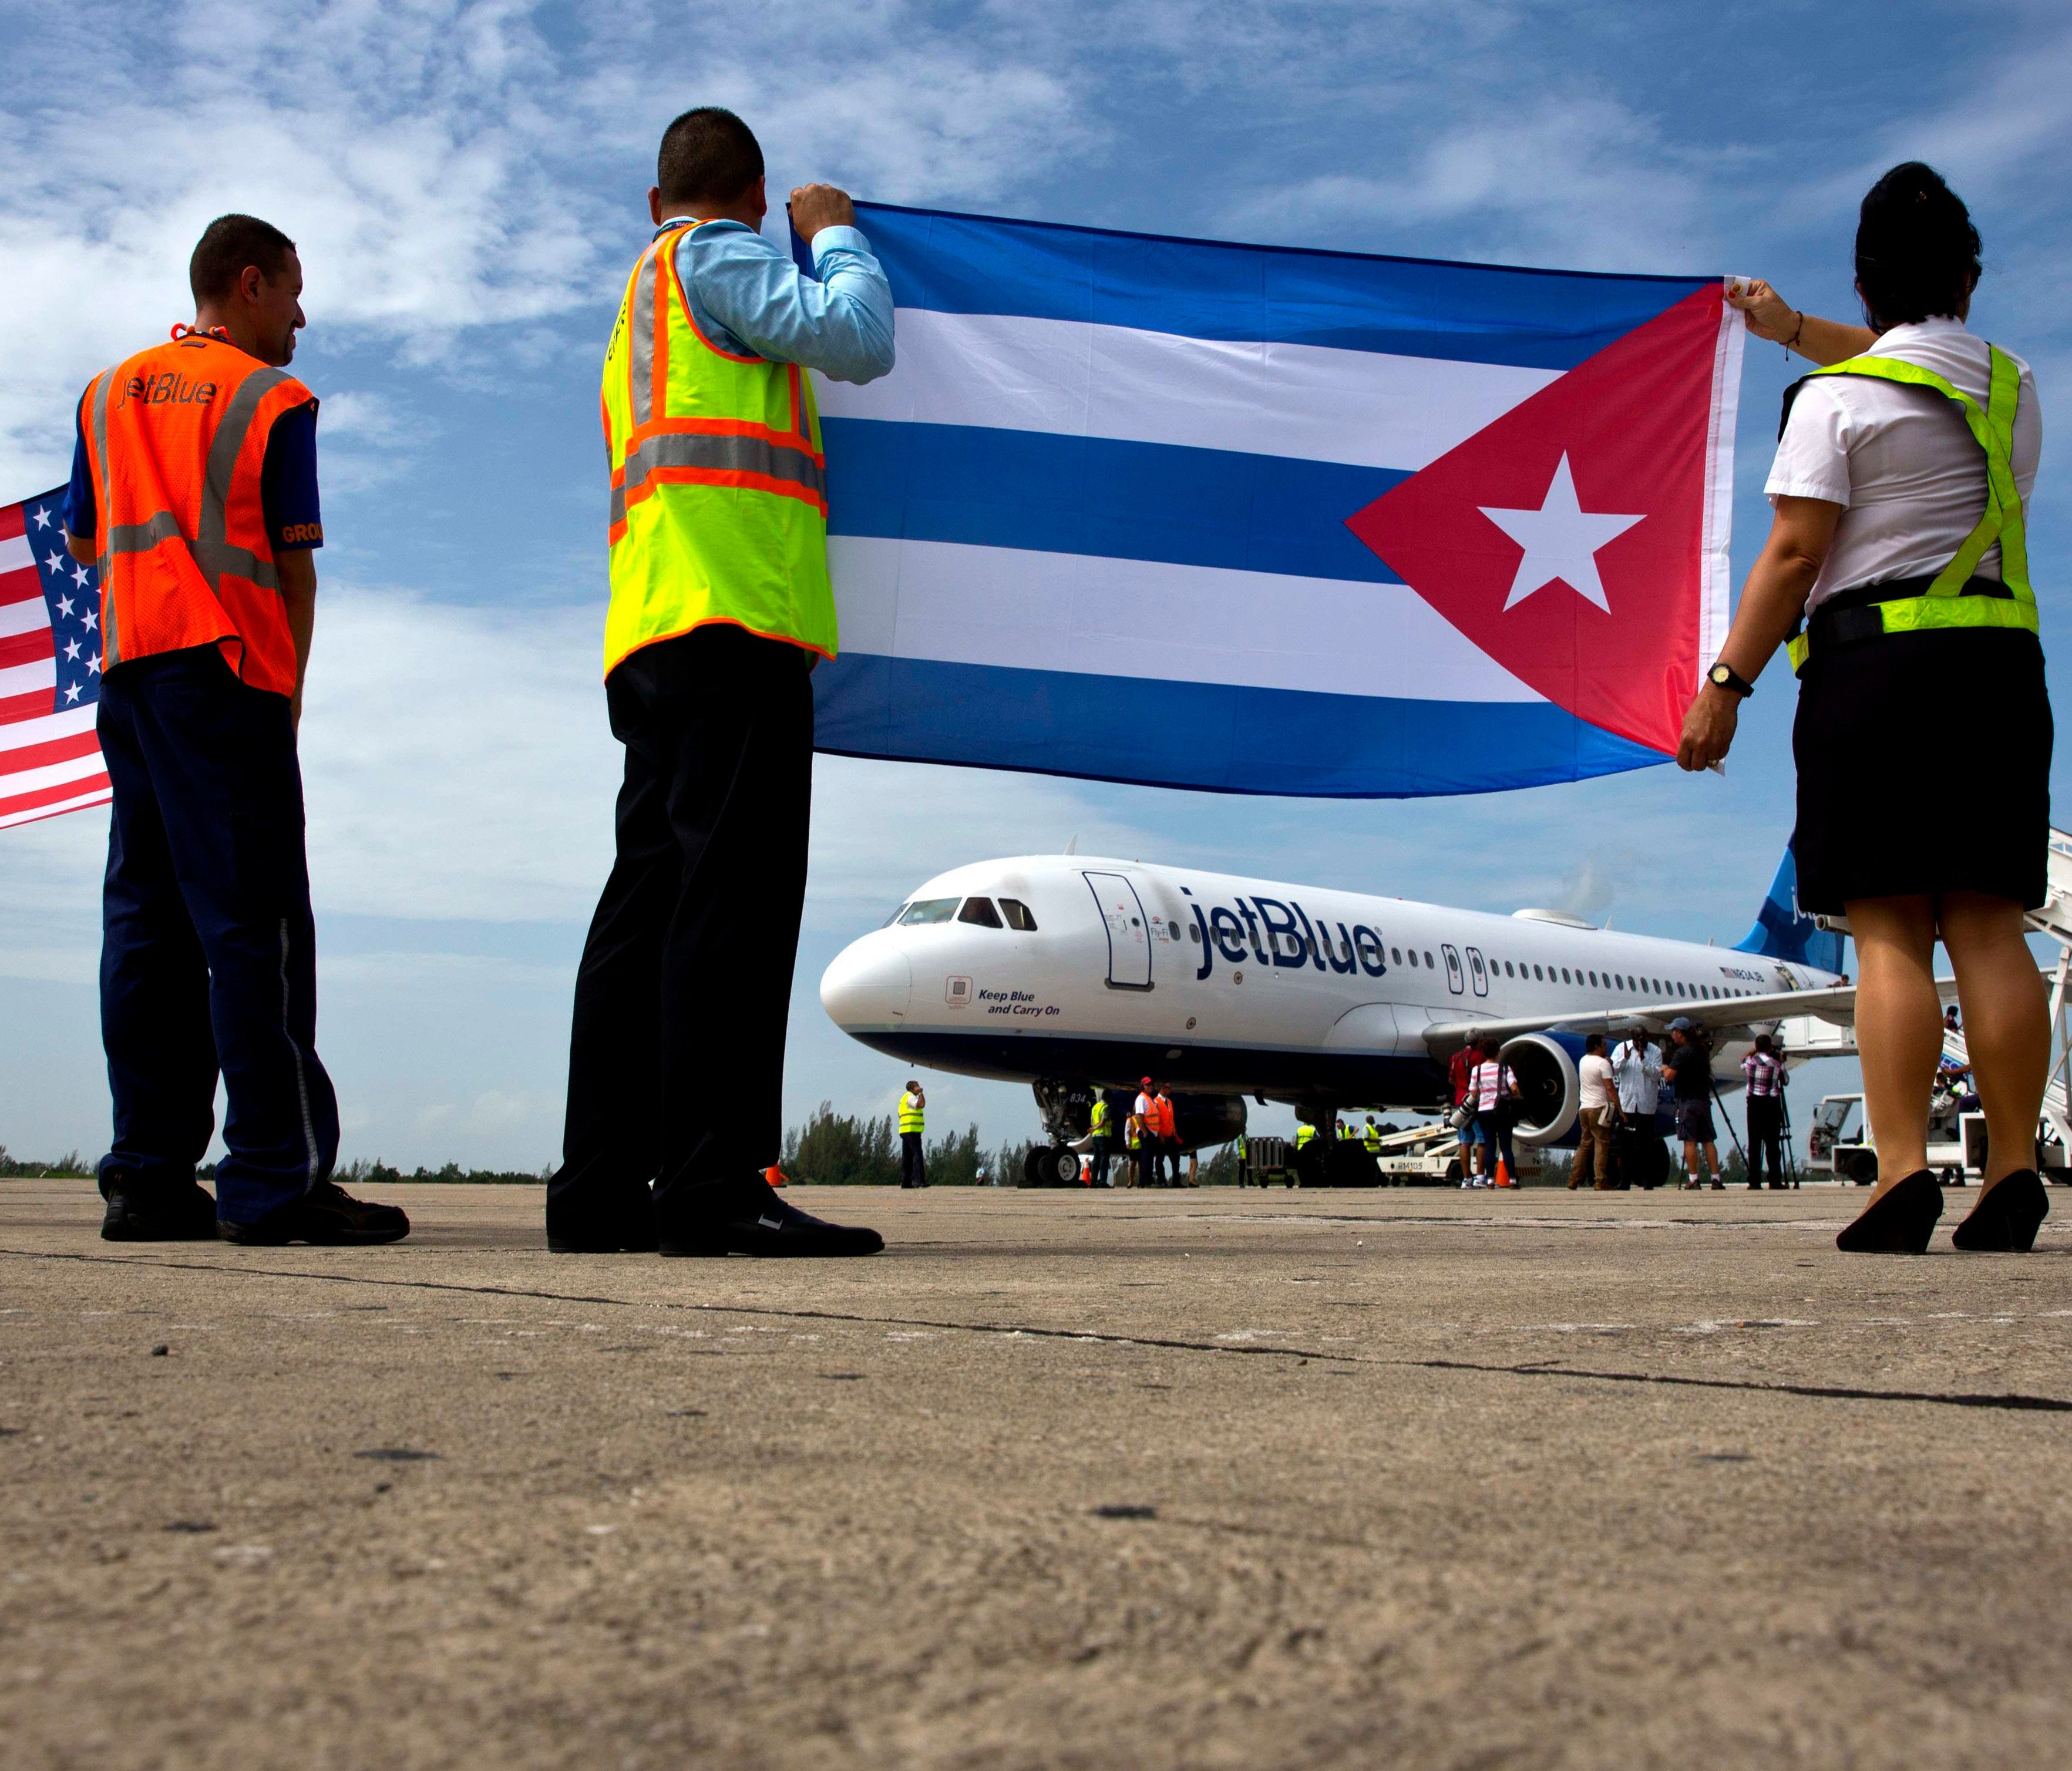 Airport workers receive the JetBlue flight 387 holding the United States and Cuban national flags on the airport tarmac in Santa Clara, Cuba.